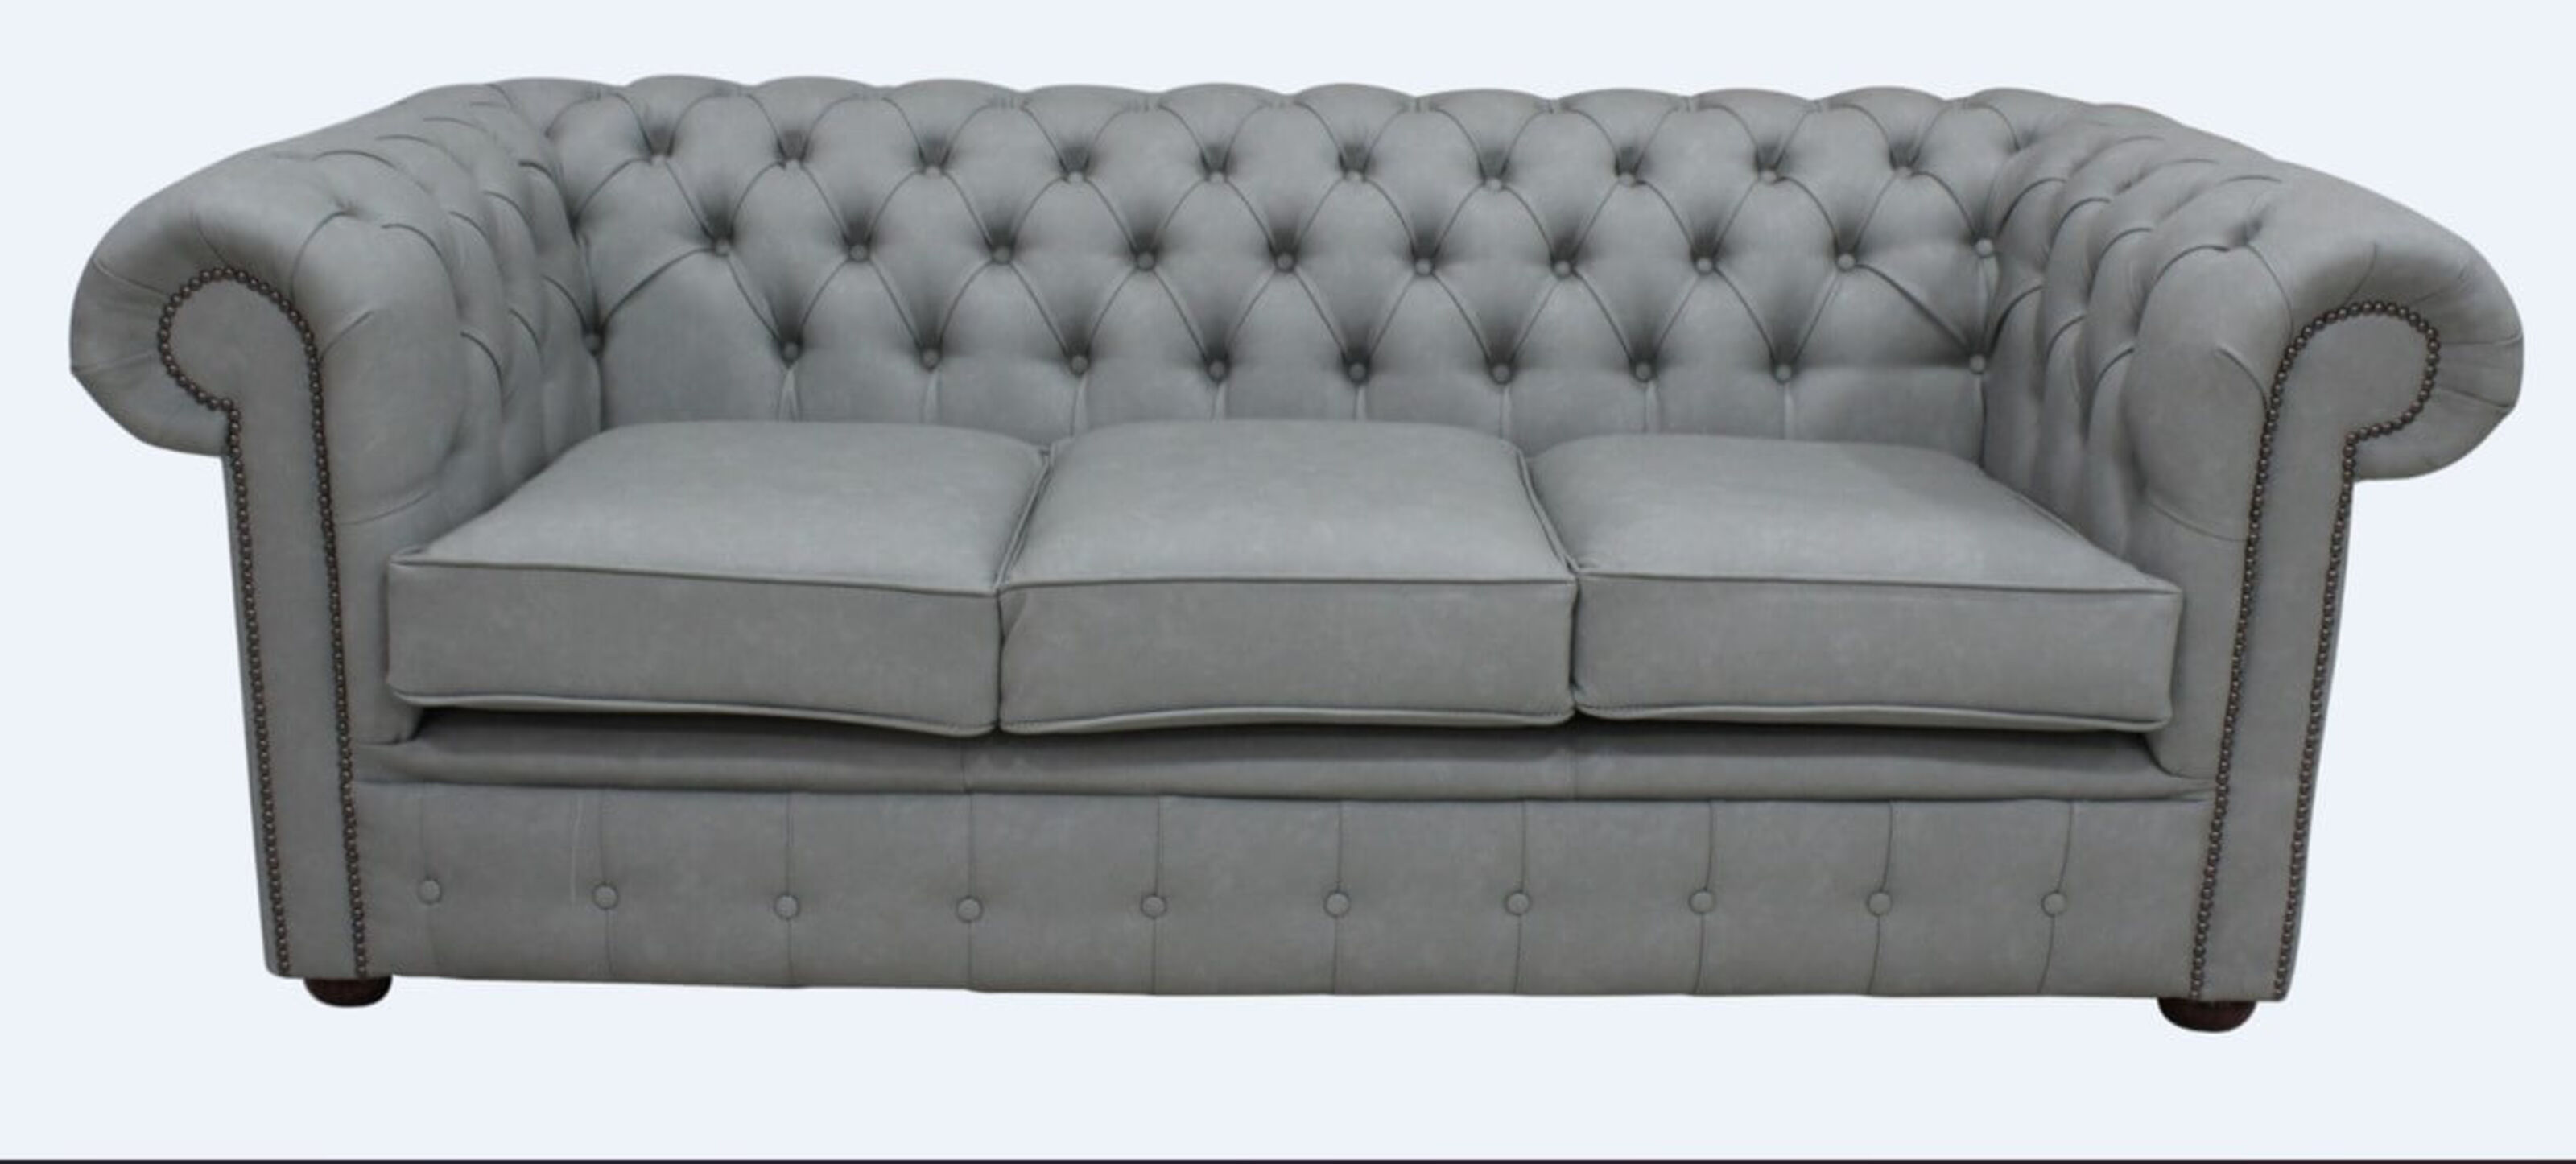 Shadow Faux Leather Chesterfield Sofa, Faux Leather Chesterfield Sofa Uk